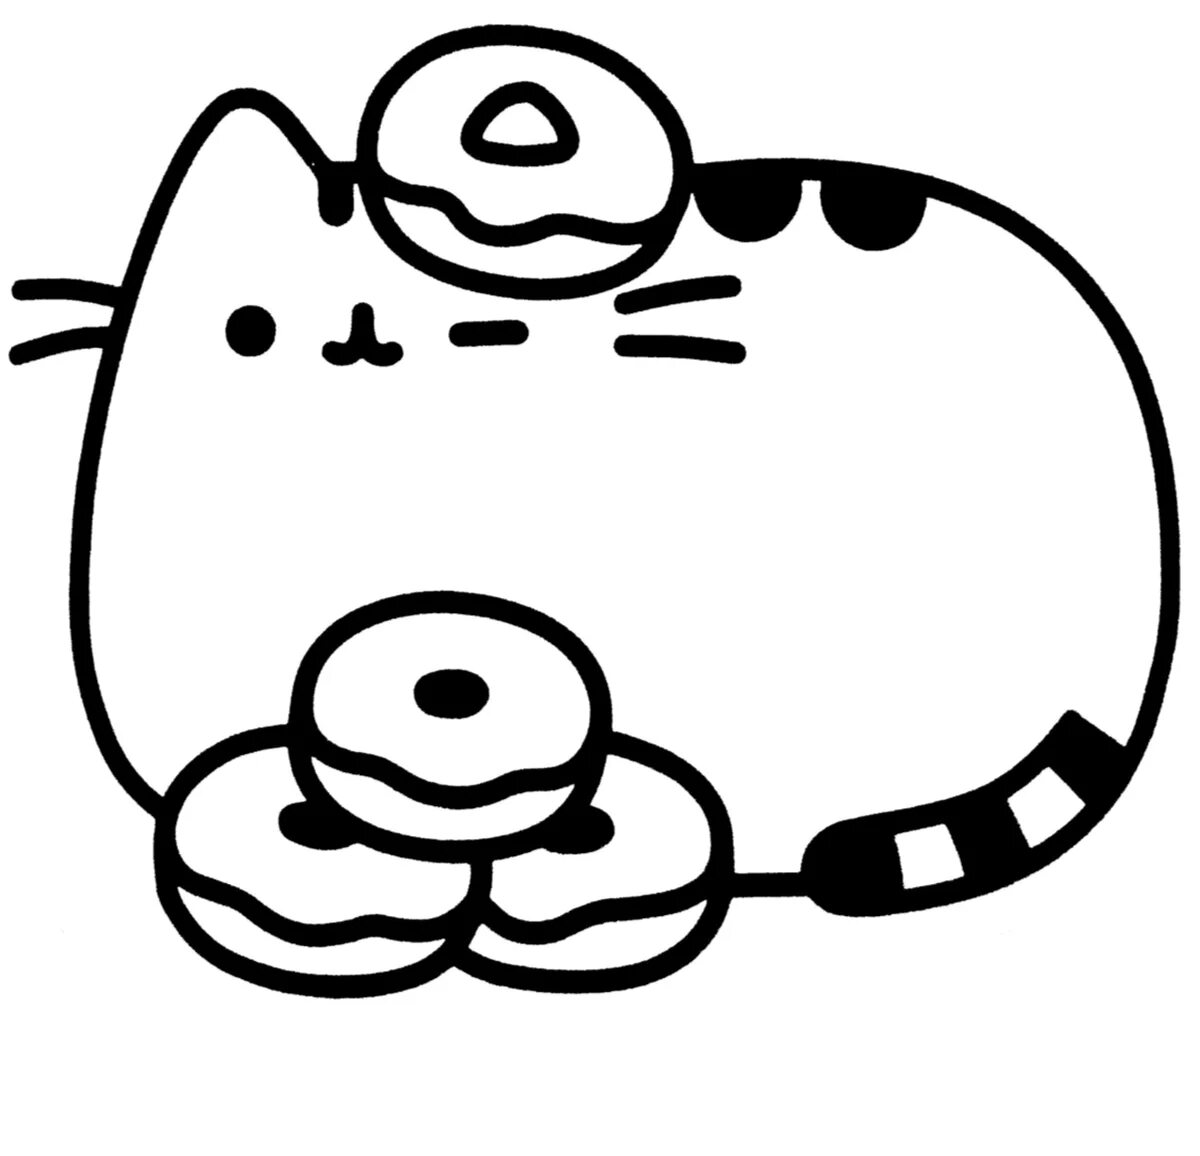 Cunning pusheen cat coloring page